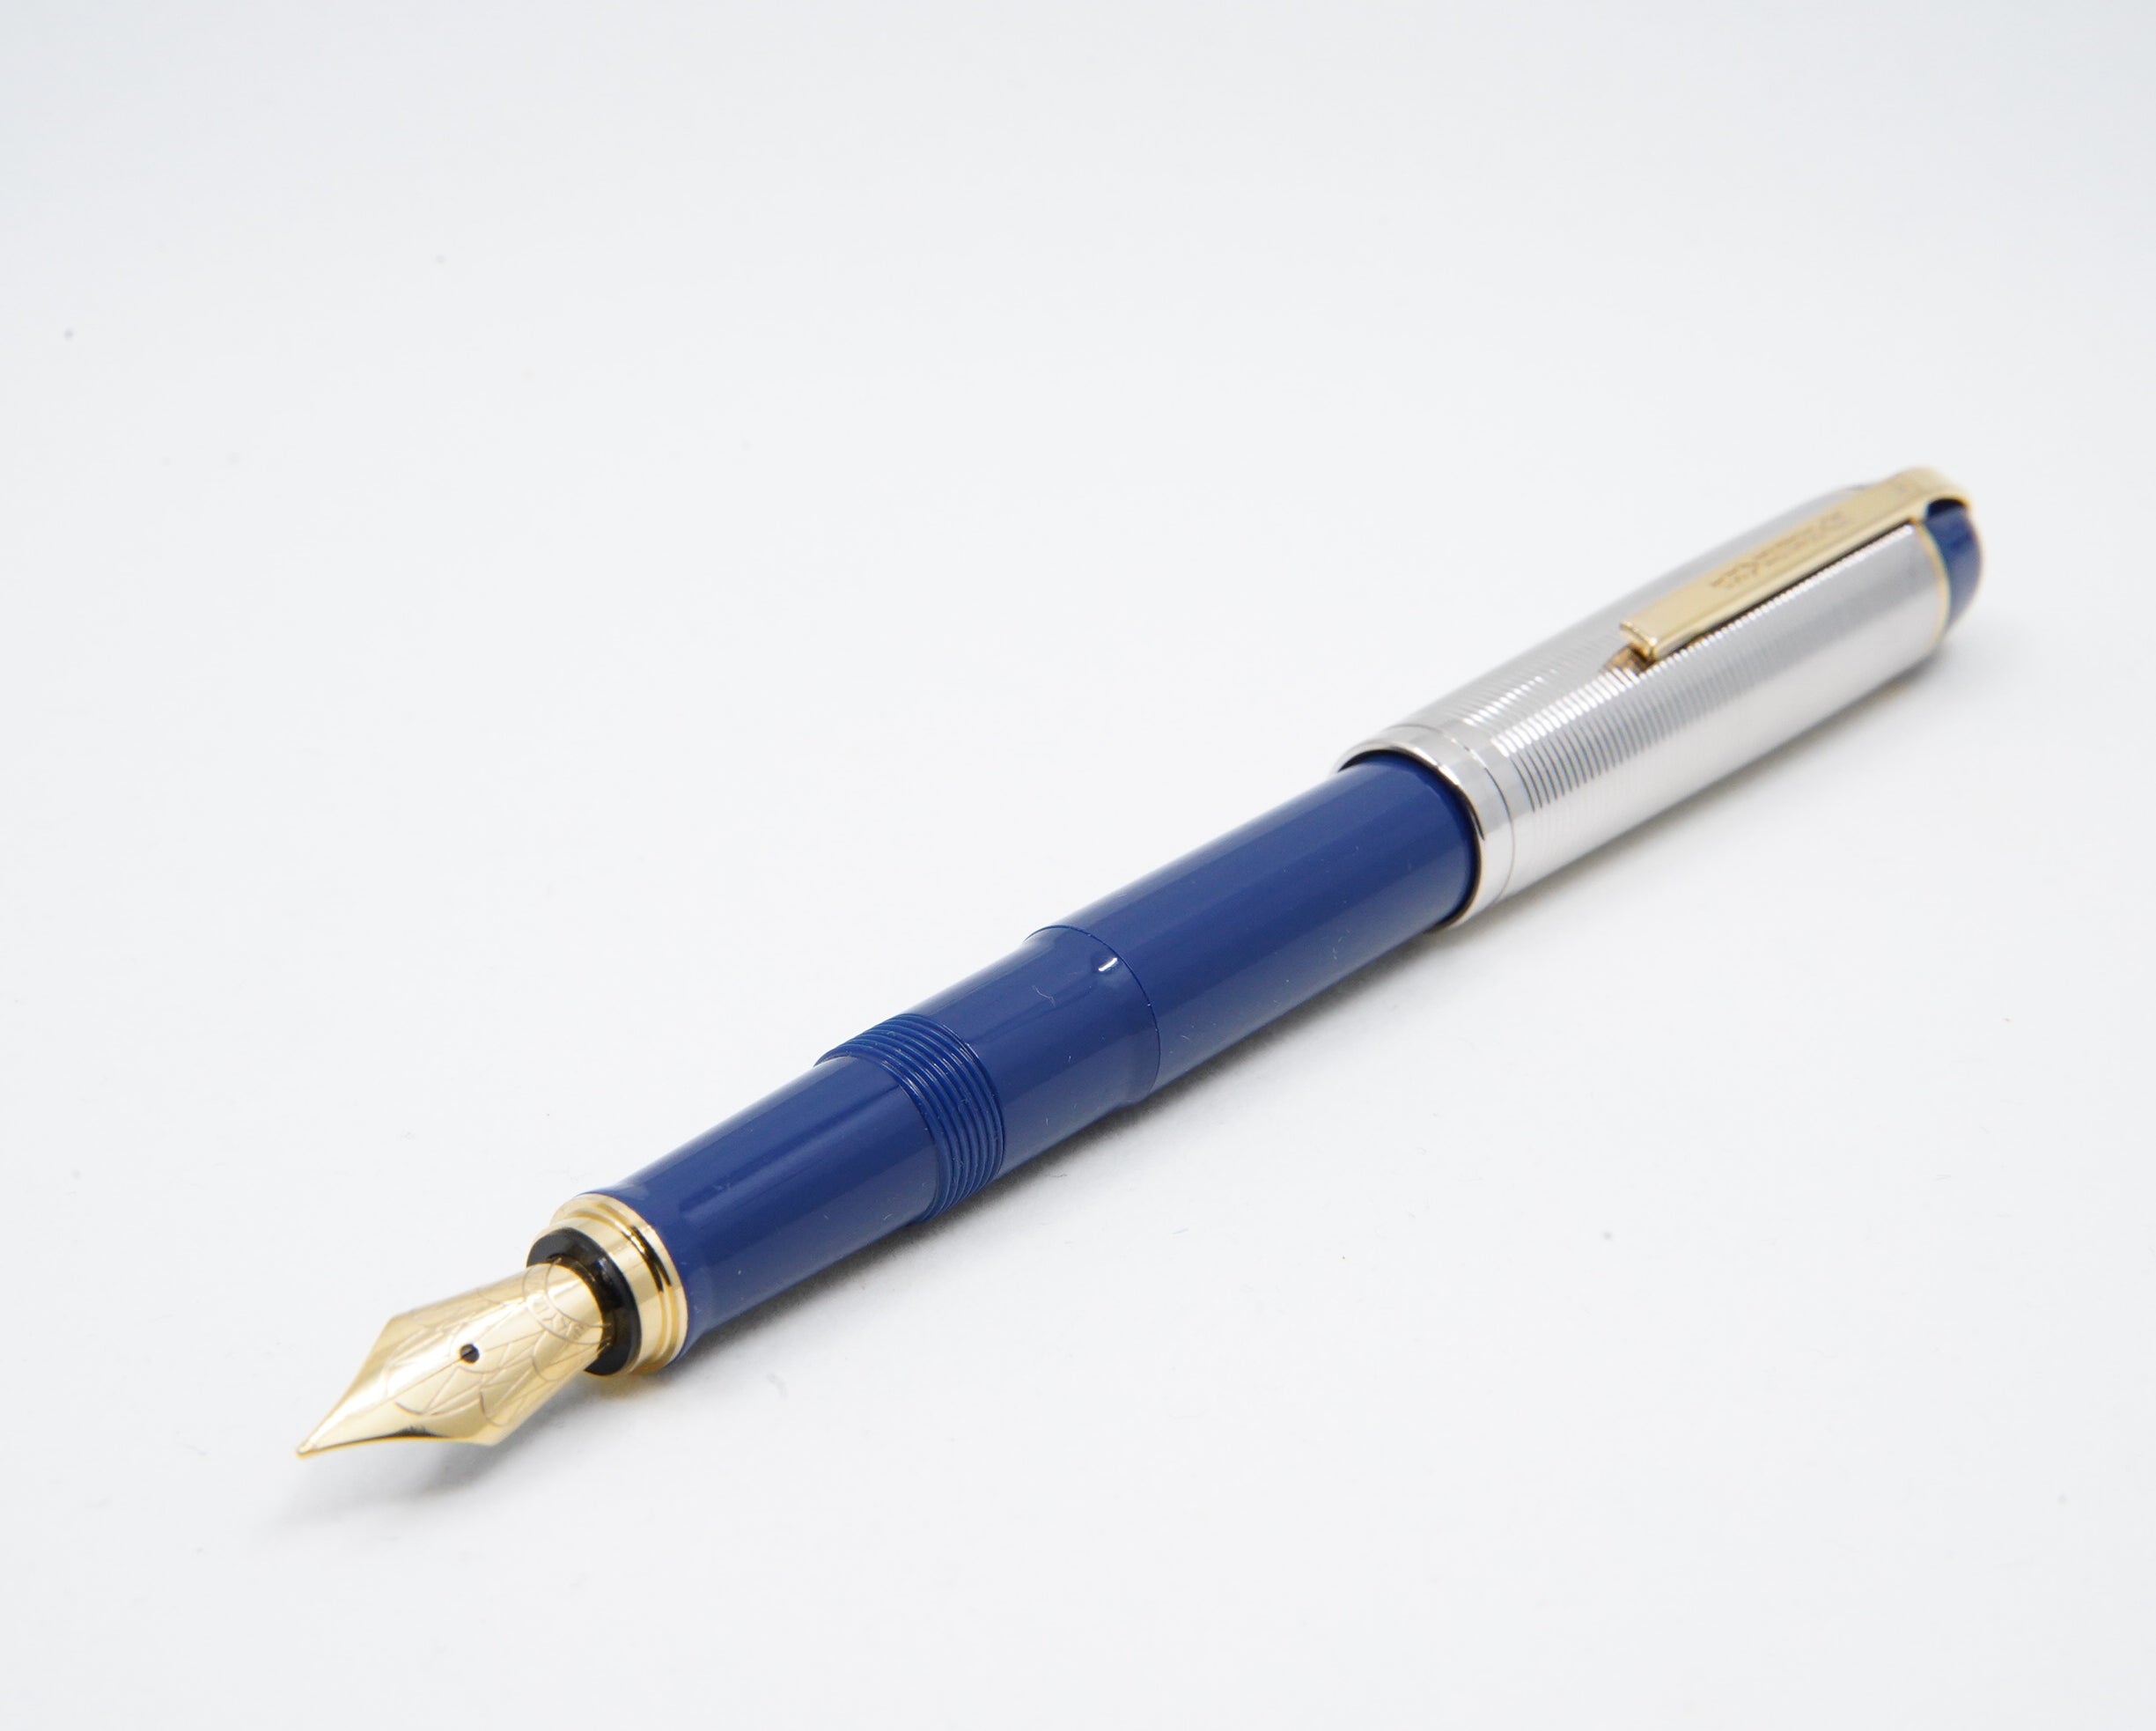 Wahl Eversharp Skyline FP Navy Blue - The iconic SKYLINE created by Henry Dreyfus in 1939